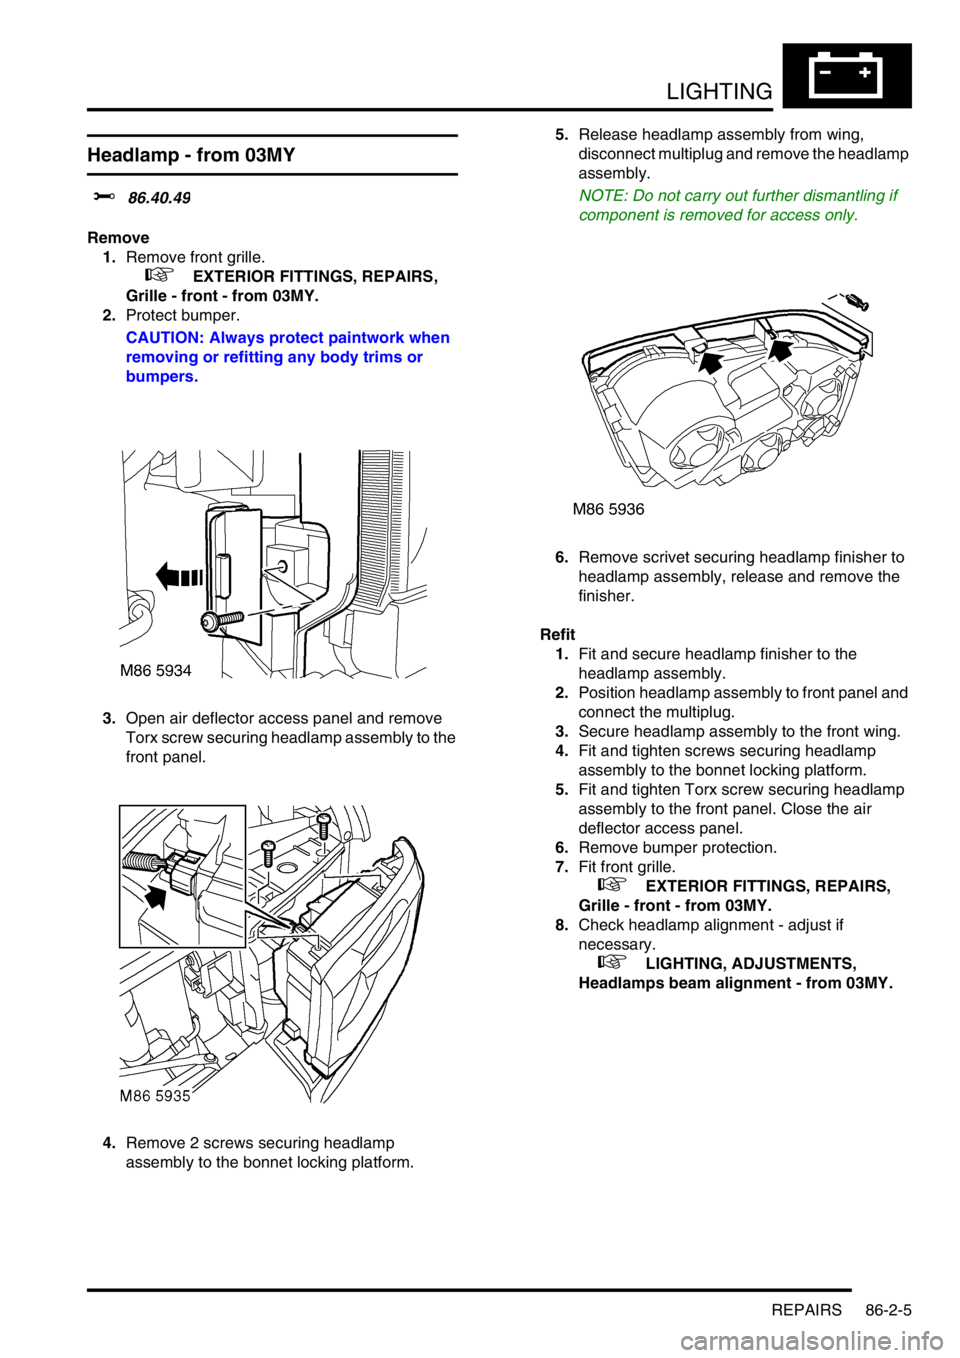 LAND ROVER DISCOVERY 2002  Workshop Manual LIGHTING
REPAIRS 86-2-5
Headlamp - from 03MY 
$% 86.40.49
Remove
1.Remove front grille.
 
 +  EXTERIOR FITTINGS, REPAIRS, 
Grille - front - from 03MY.
2.Protect bumper.
CAUTION: Always protect paintwo